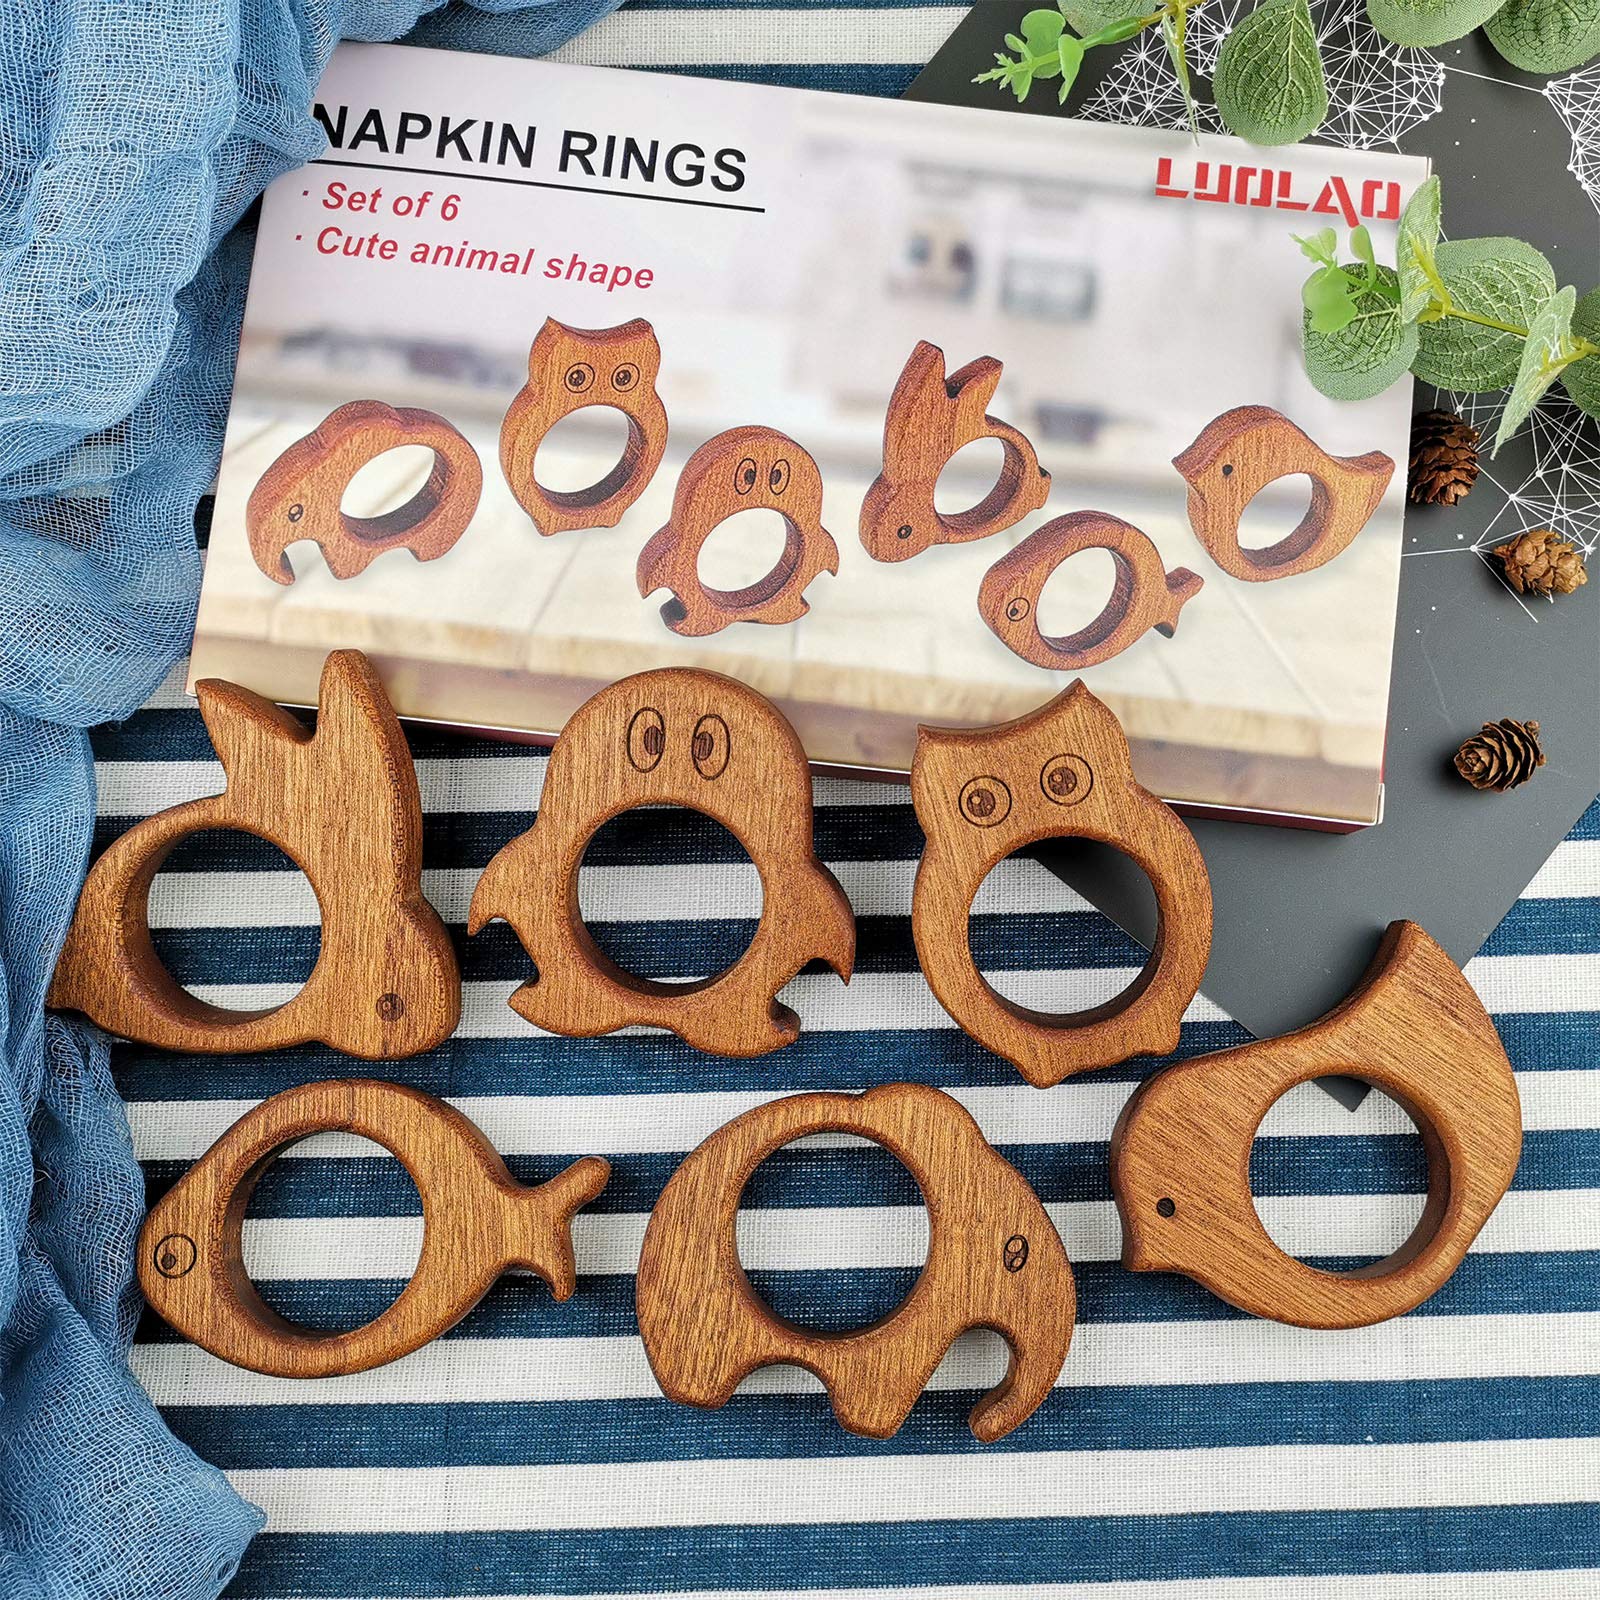 LUOLAO Handmade Wood Napkin Rings Set of 6, Cute Animal Shape Table Decor for Christmas, Thanksgiving and Other Holiday Parties